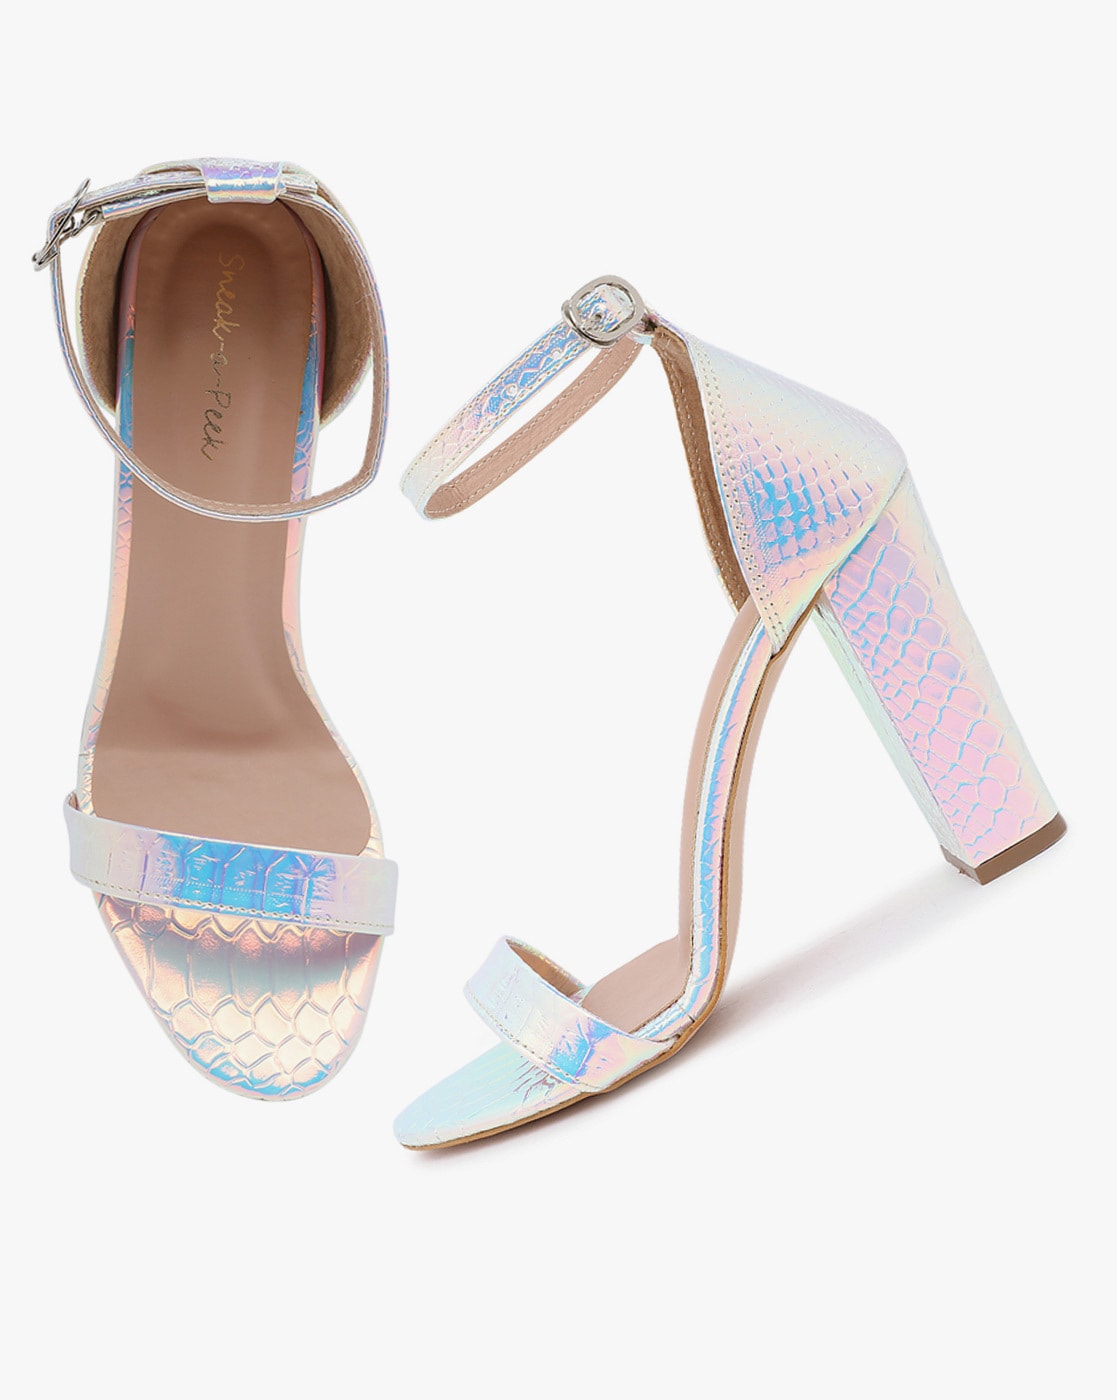 Women Sandals Gold Silver Wedding Holographic Ankle Buckle Sandals Ladies  Open-toe Crystal High Heels Transparent Jelly Sandals